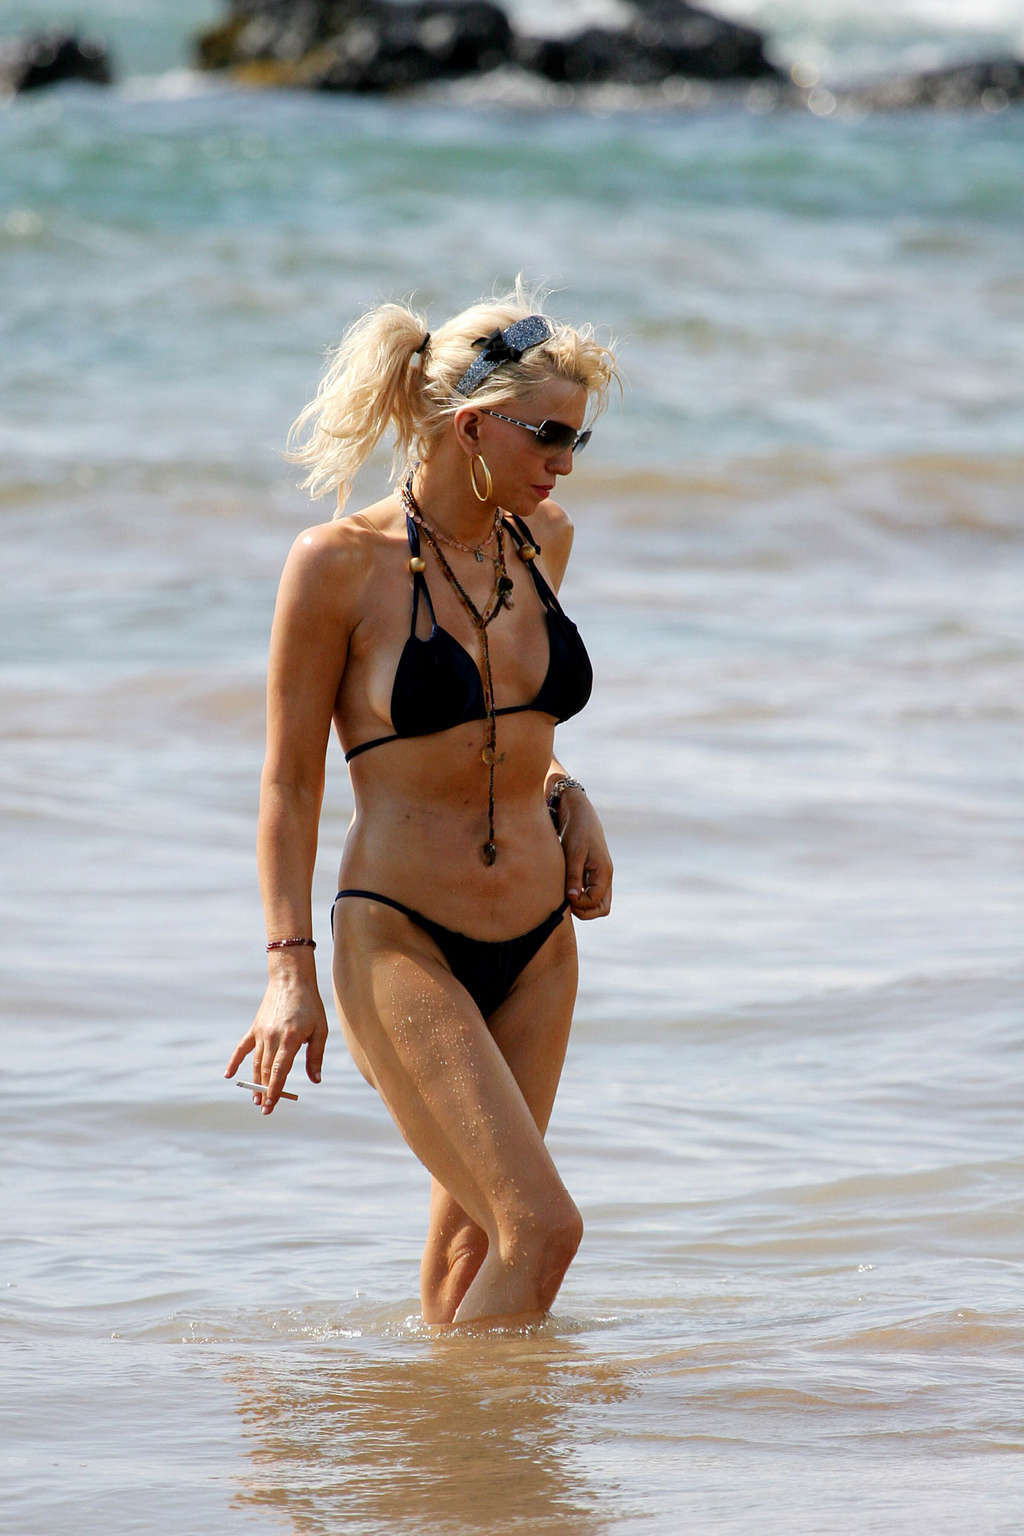 Courtney Love posing on the beach in black bikini and showing sexy body